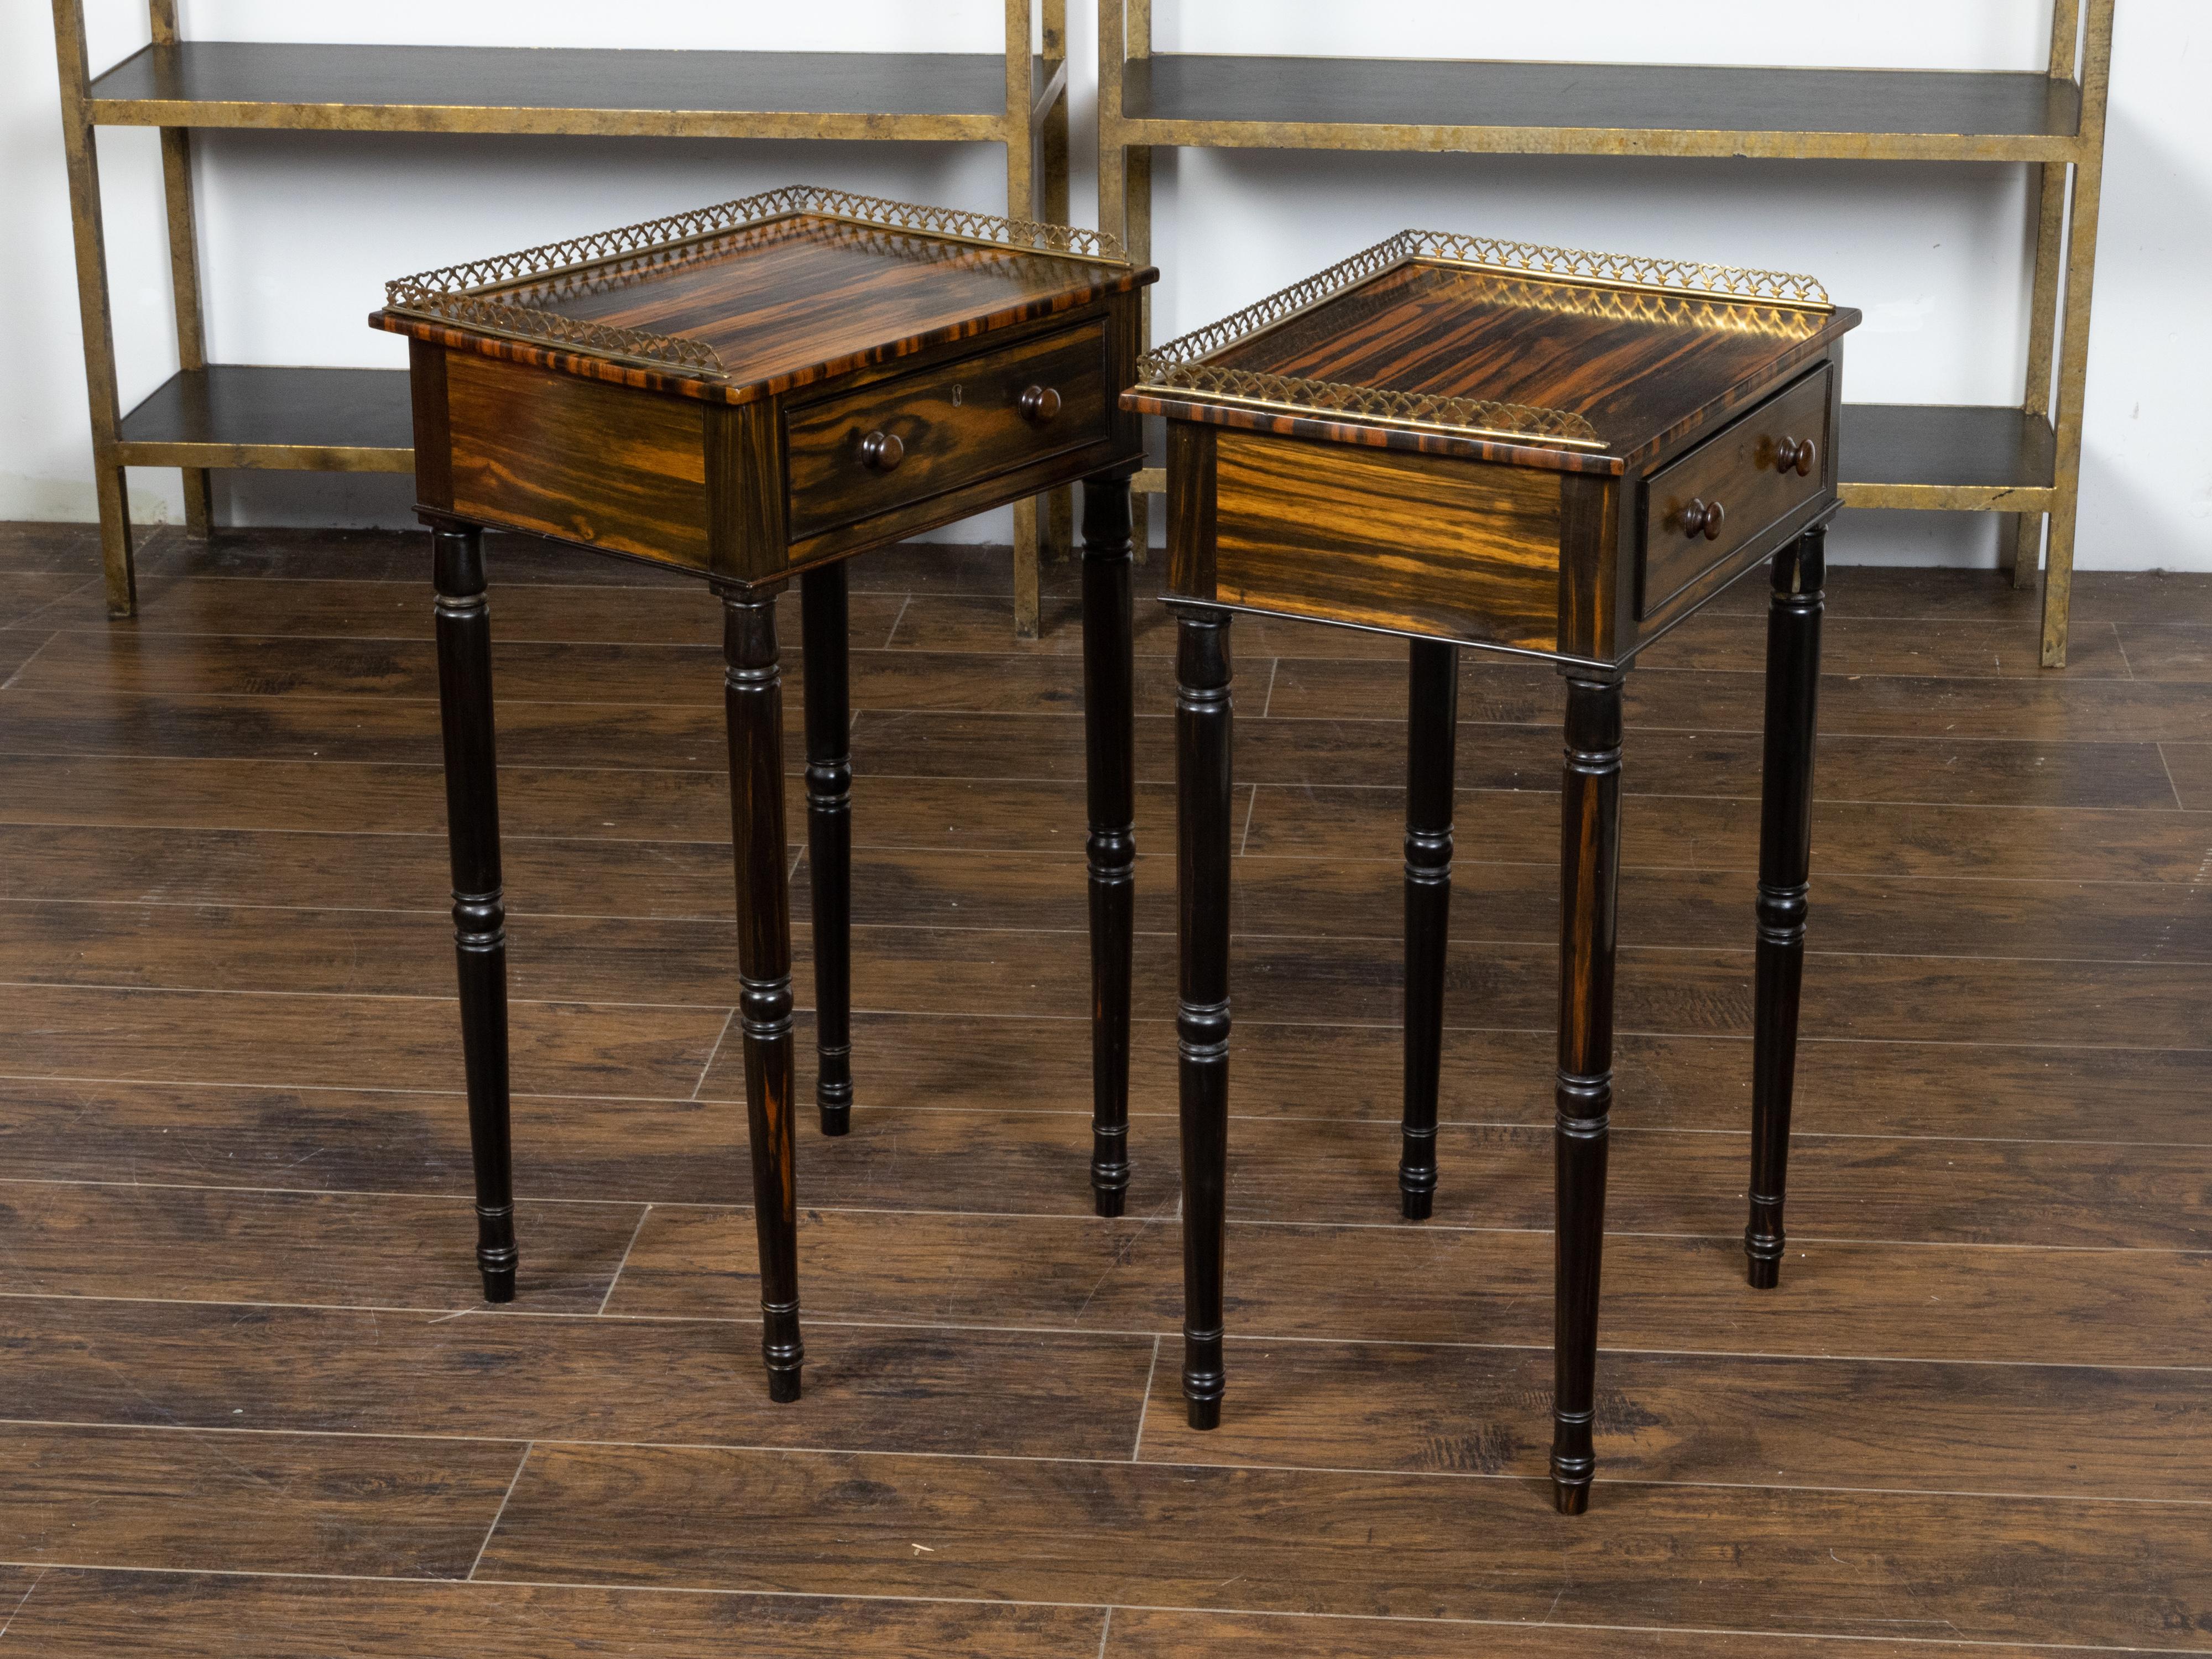 Pair of English Regency Period 19th Century Zebra Wood Tables with Brass Gallery For Sale 3